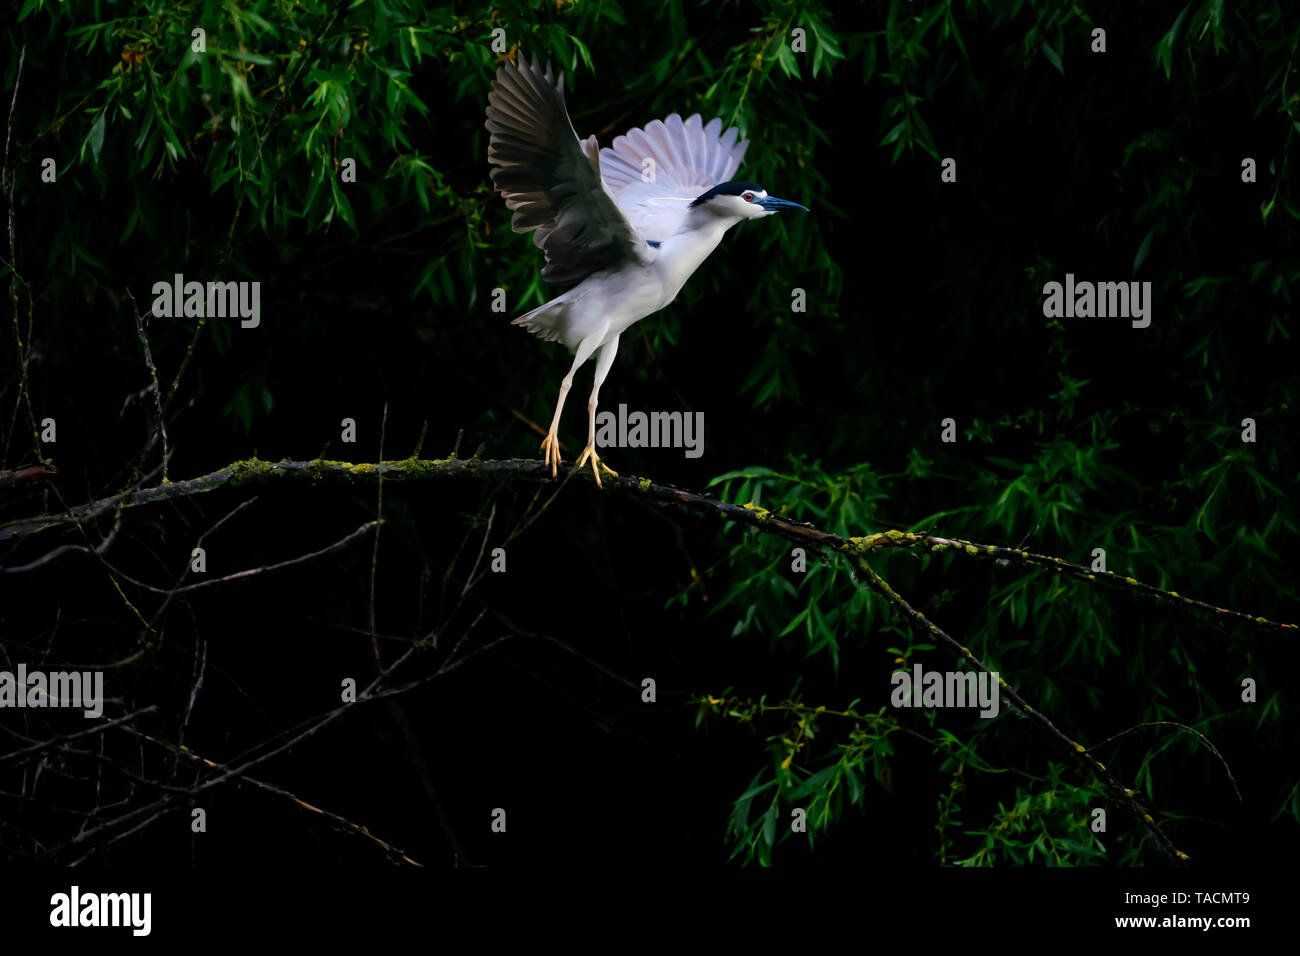 Black-crowned night heron bird above a tree branch opening its wings to take flight Stock Photo